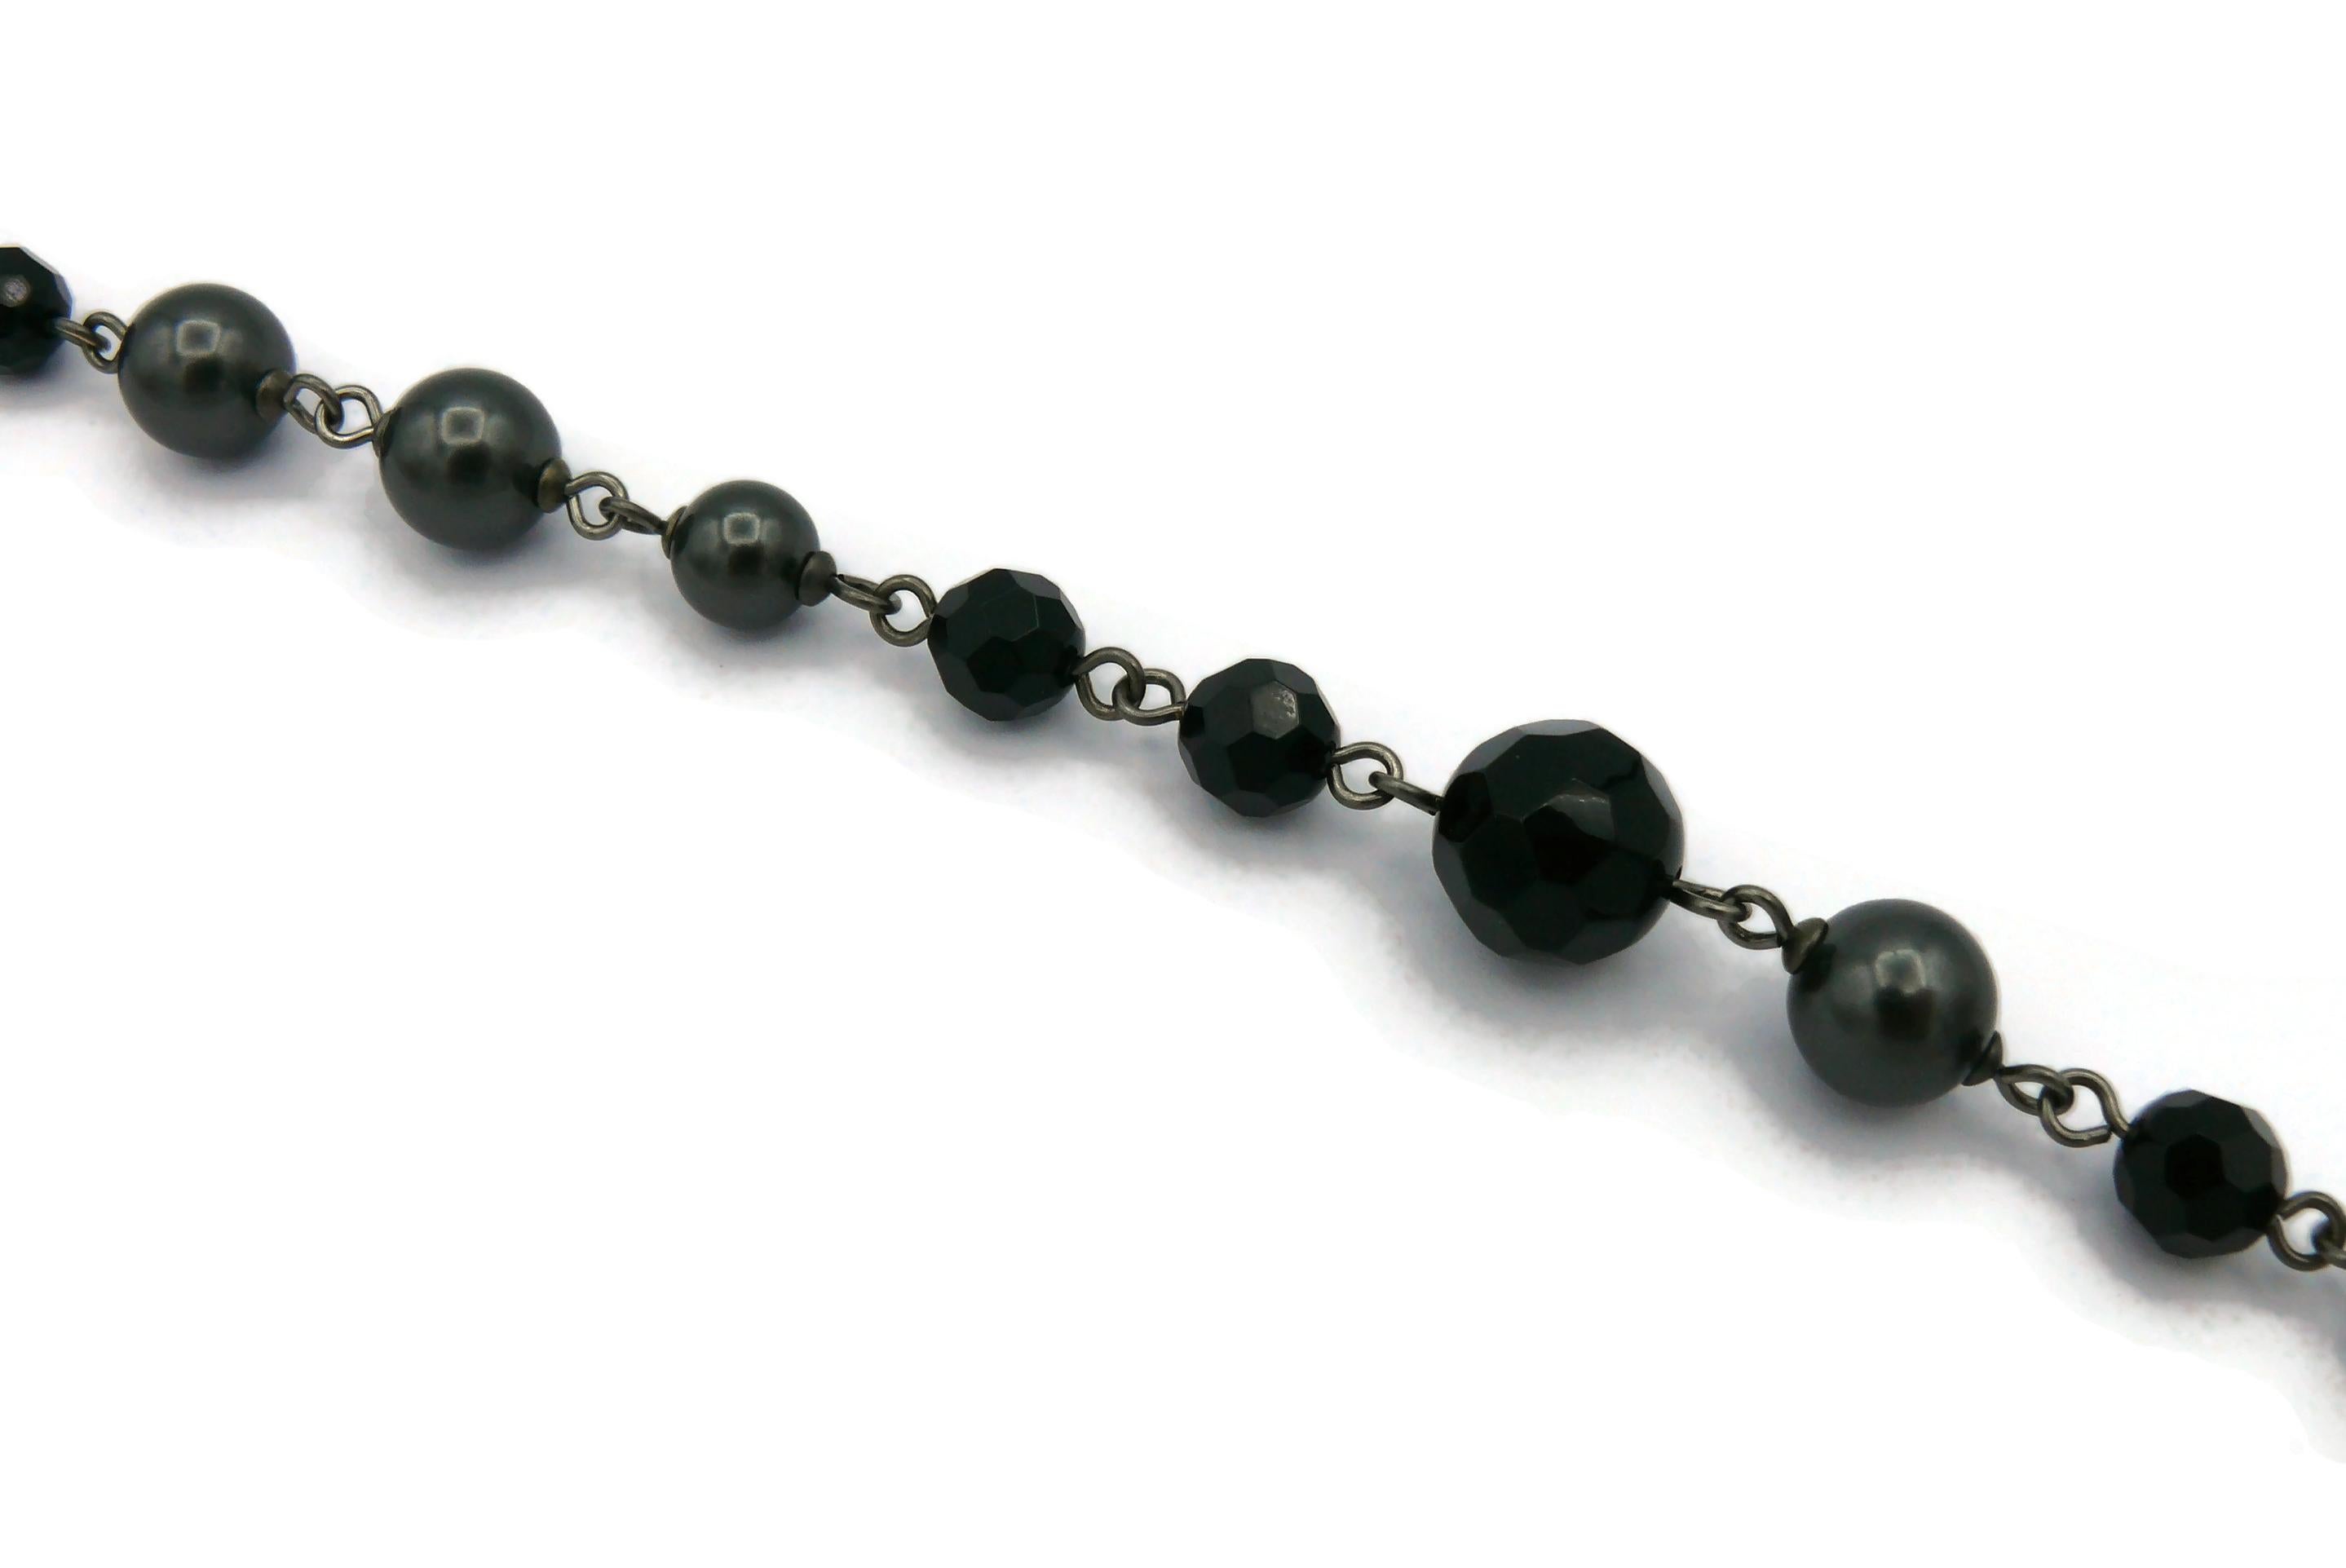 Women's CHANEL by KARL LAGERFELD 2010 Grey Pearl and Black Bead CC Necklace For Sale